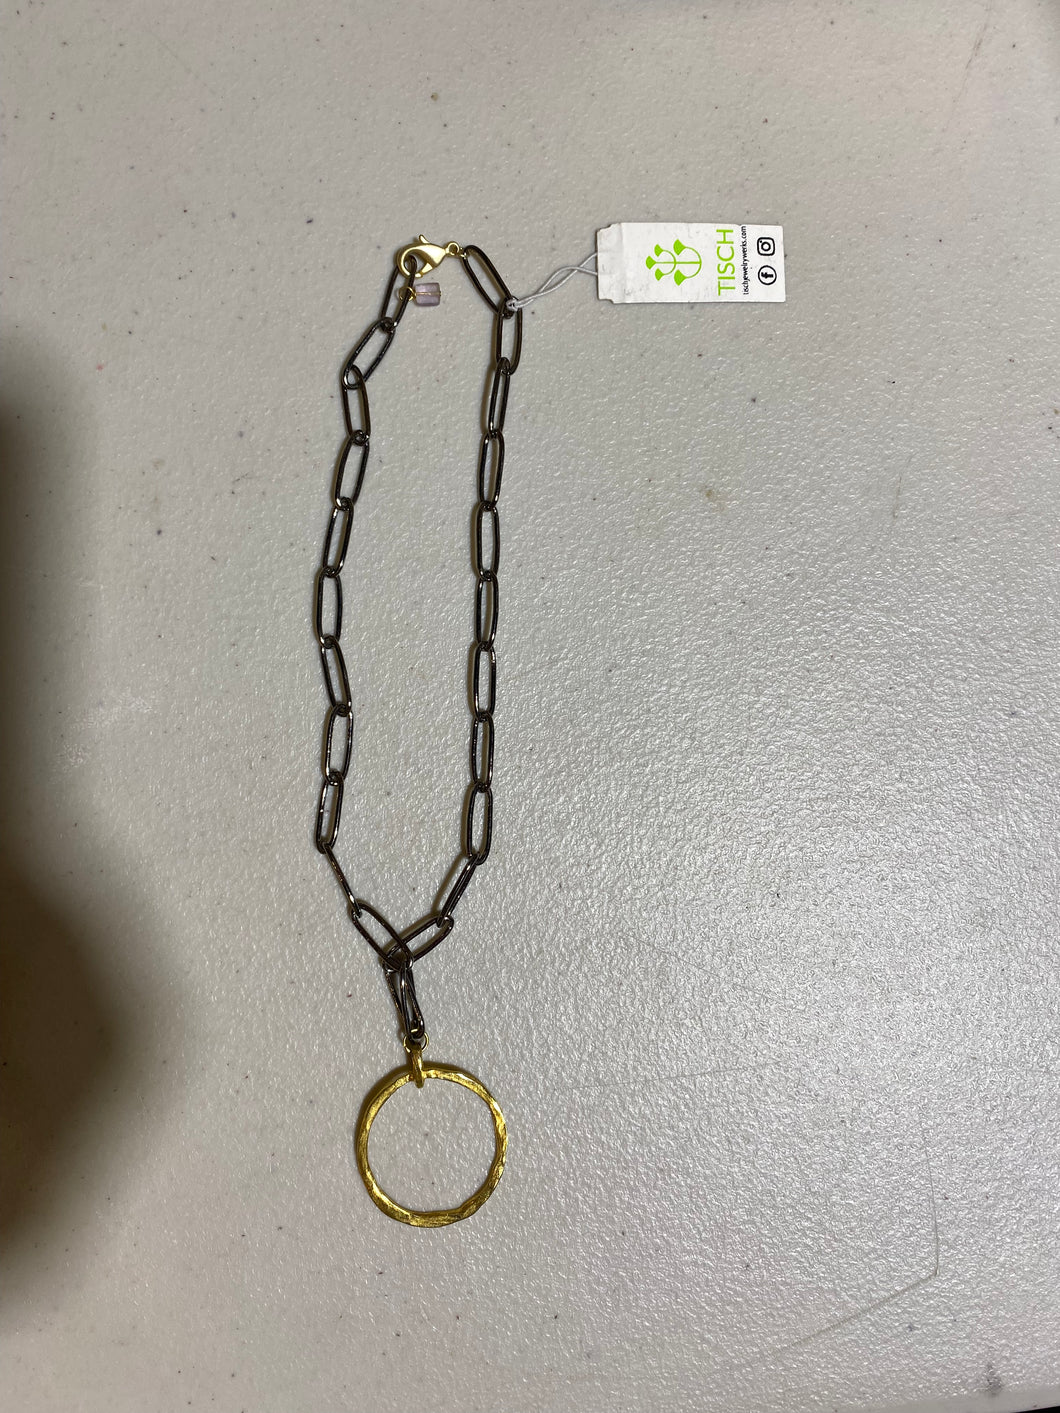 Silver Chain necklace w/ gold Circle